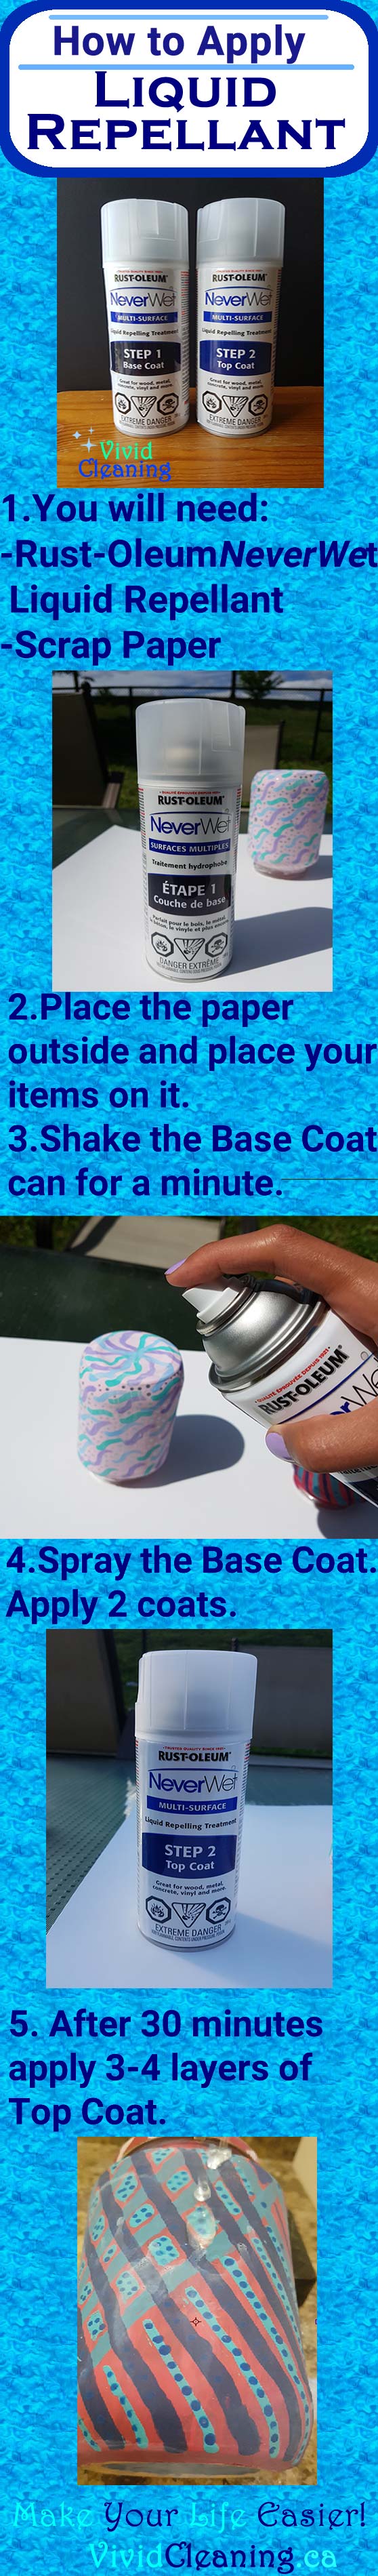 Apply two thin coats of Base Coat or more. Allow it to dry for a minimum of 30 minutes before applying Step 2: Top Coat. Apply coat of spray to the item. Allow this coat to dry for 1-2 minutes before applying the next top coat layer. Allow the item to dry for 12 hours before using it. Your items are now waterproof and protected.